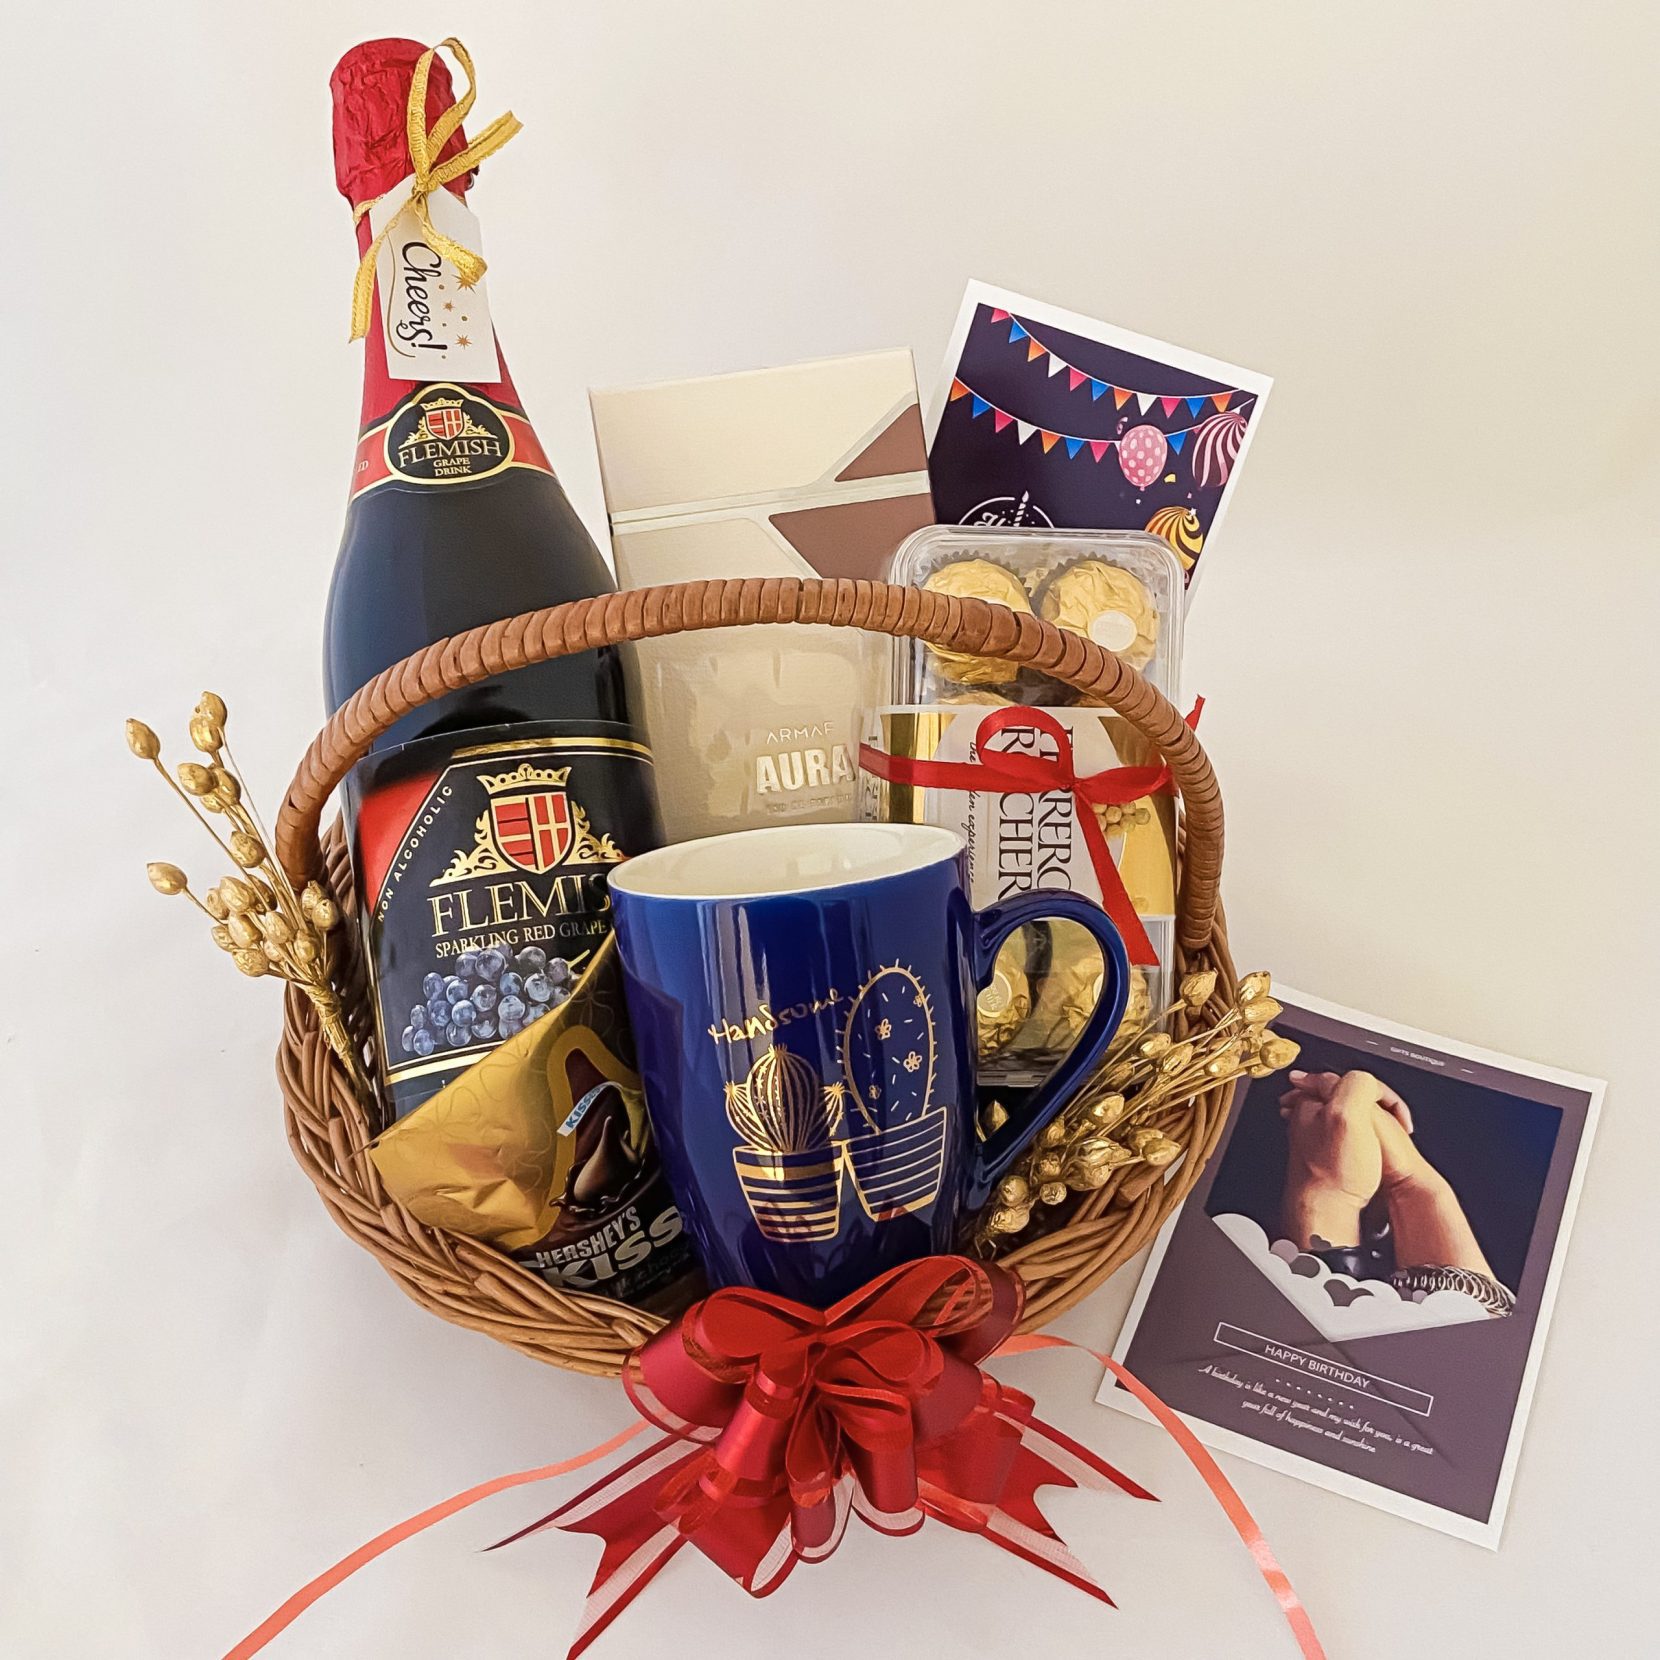 Send Chocolate Gifts, Gift Baskets & Hampers to UAE Online